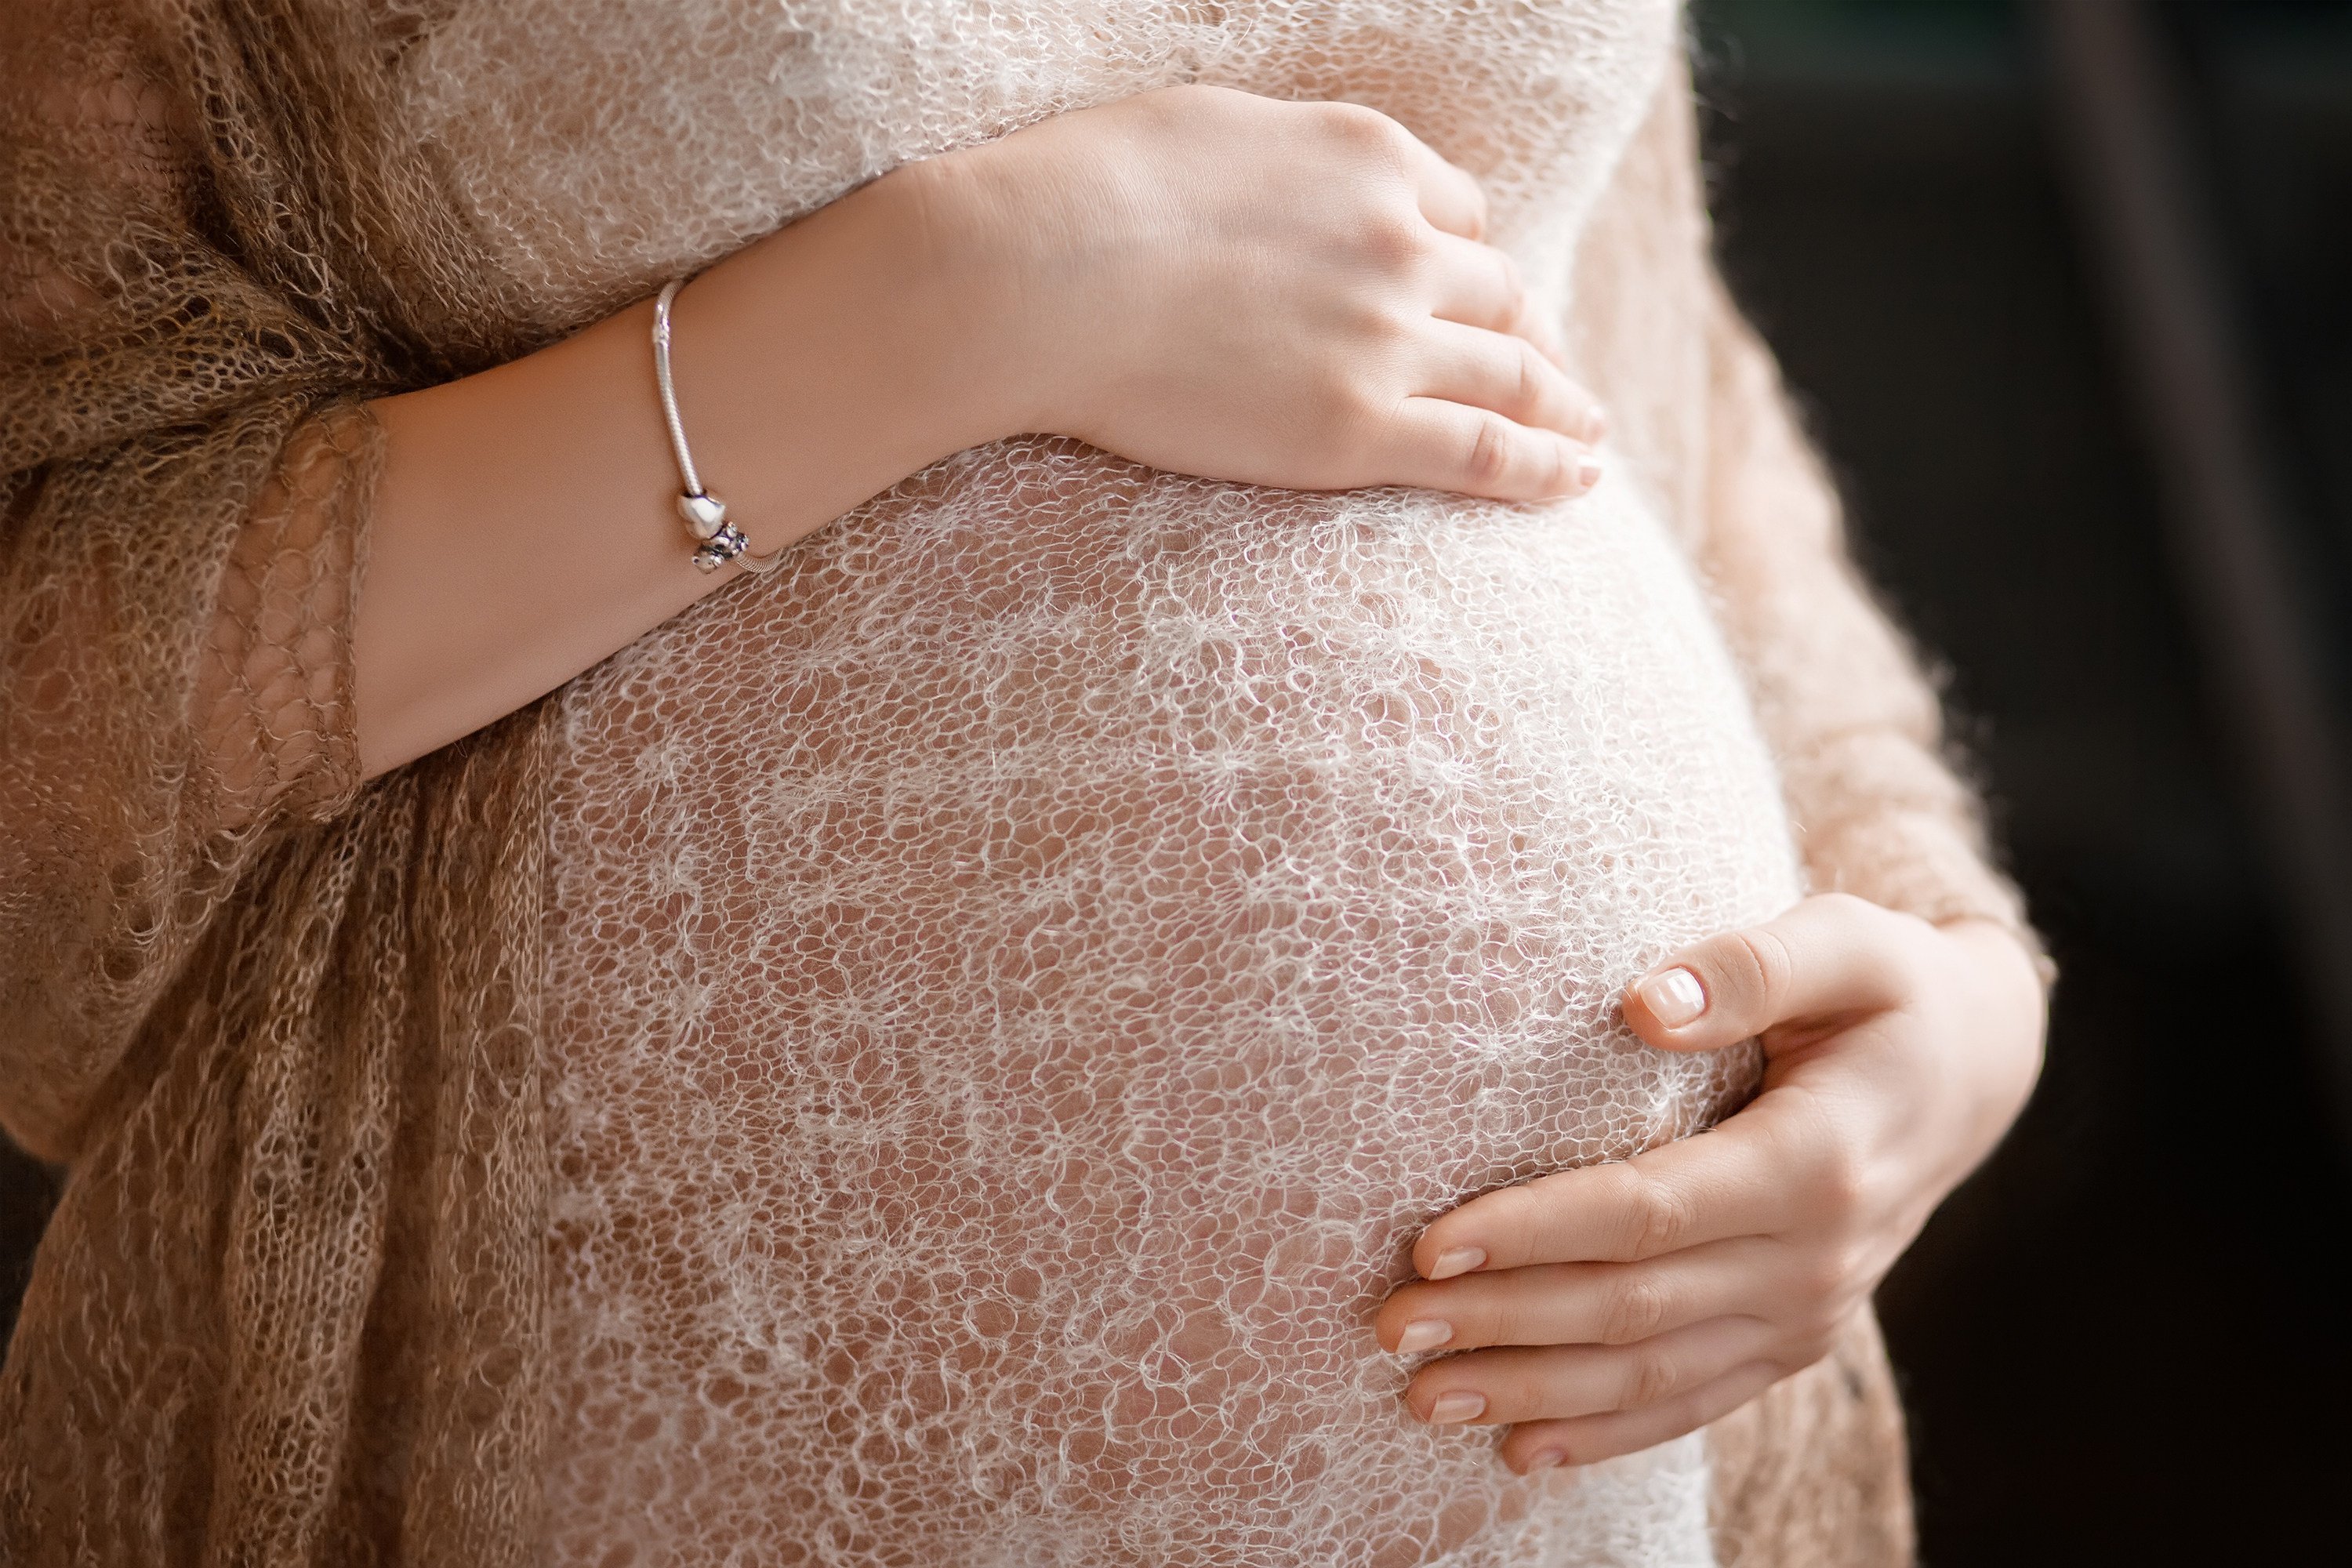 Pregnant women who contract Covid-19 face an increased risk of complications, a joint study by two Hong Kong universities has found. Photo: Shutterstock